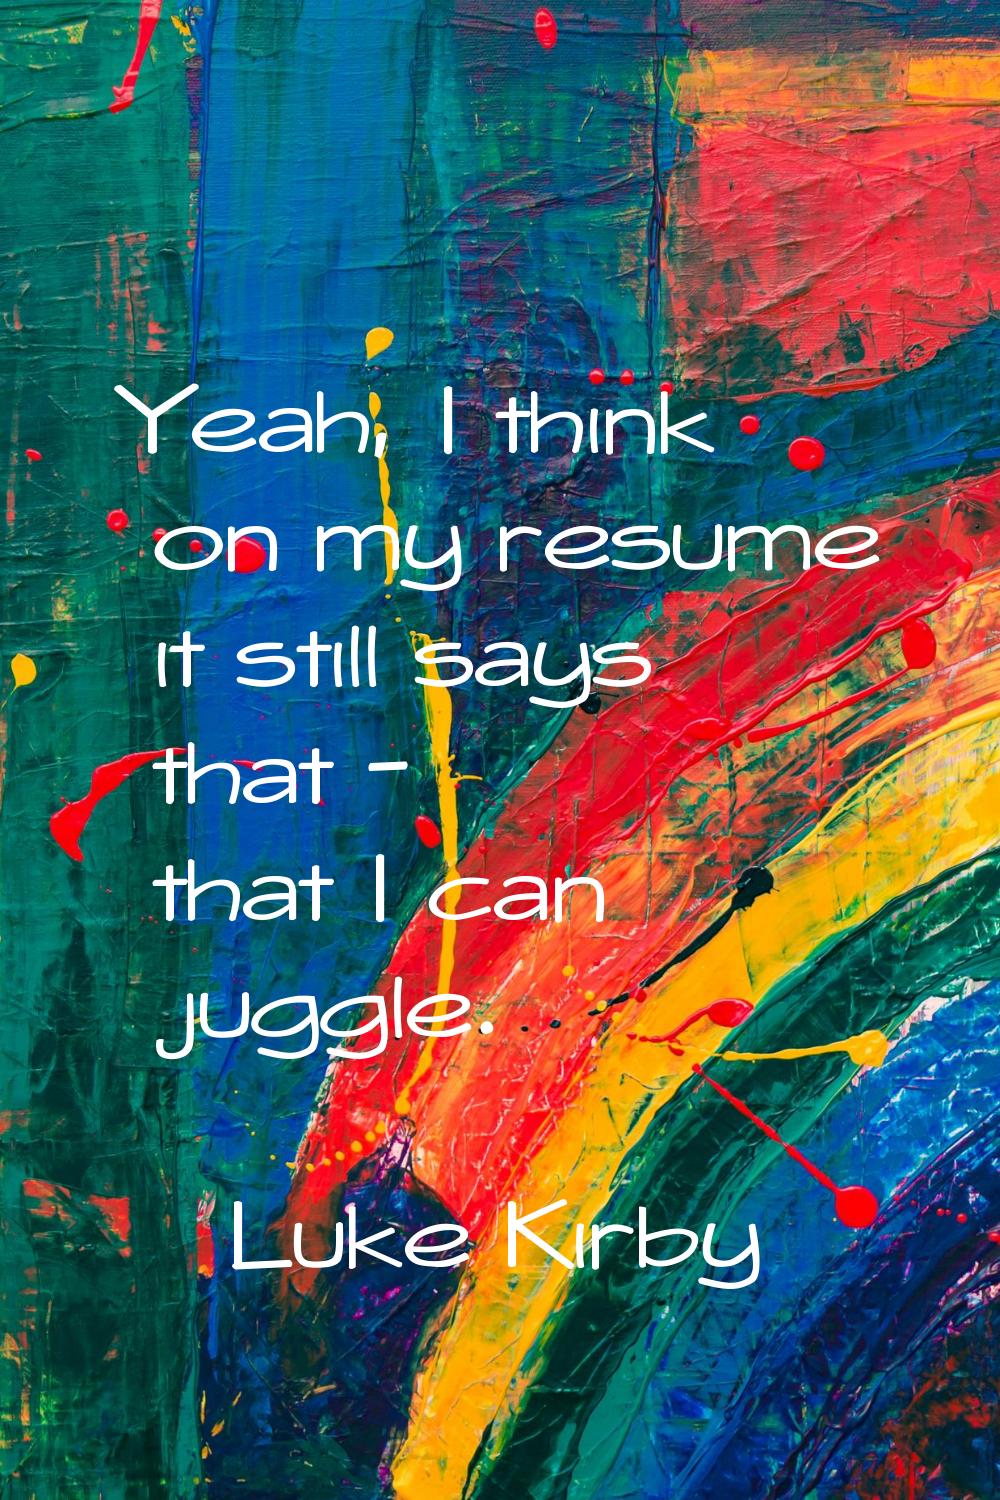 Yeah, I think on my resume it still says that - that I can juggle.